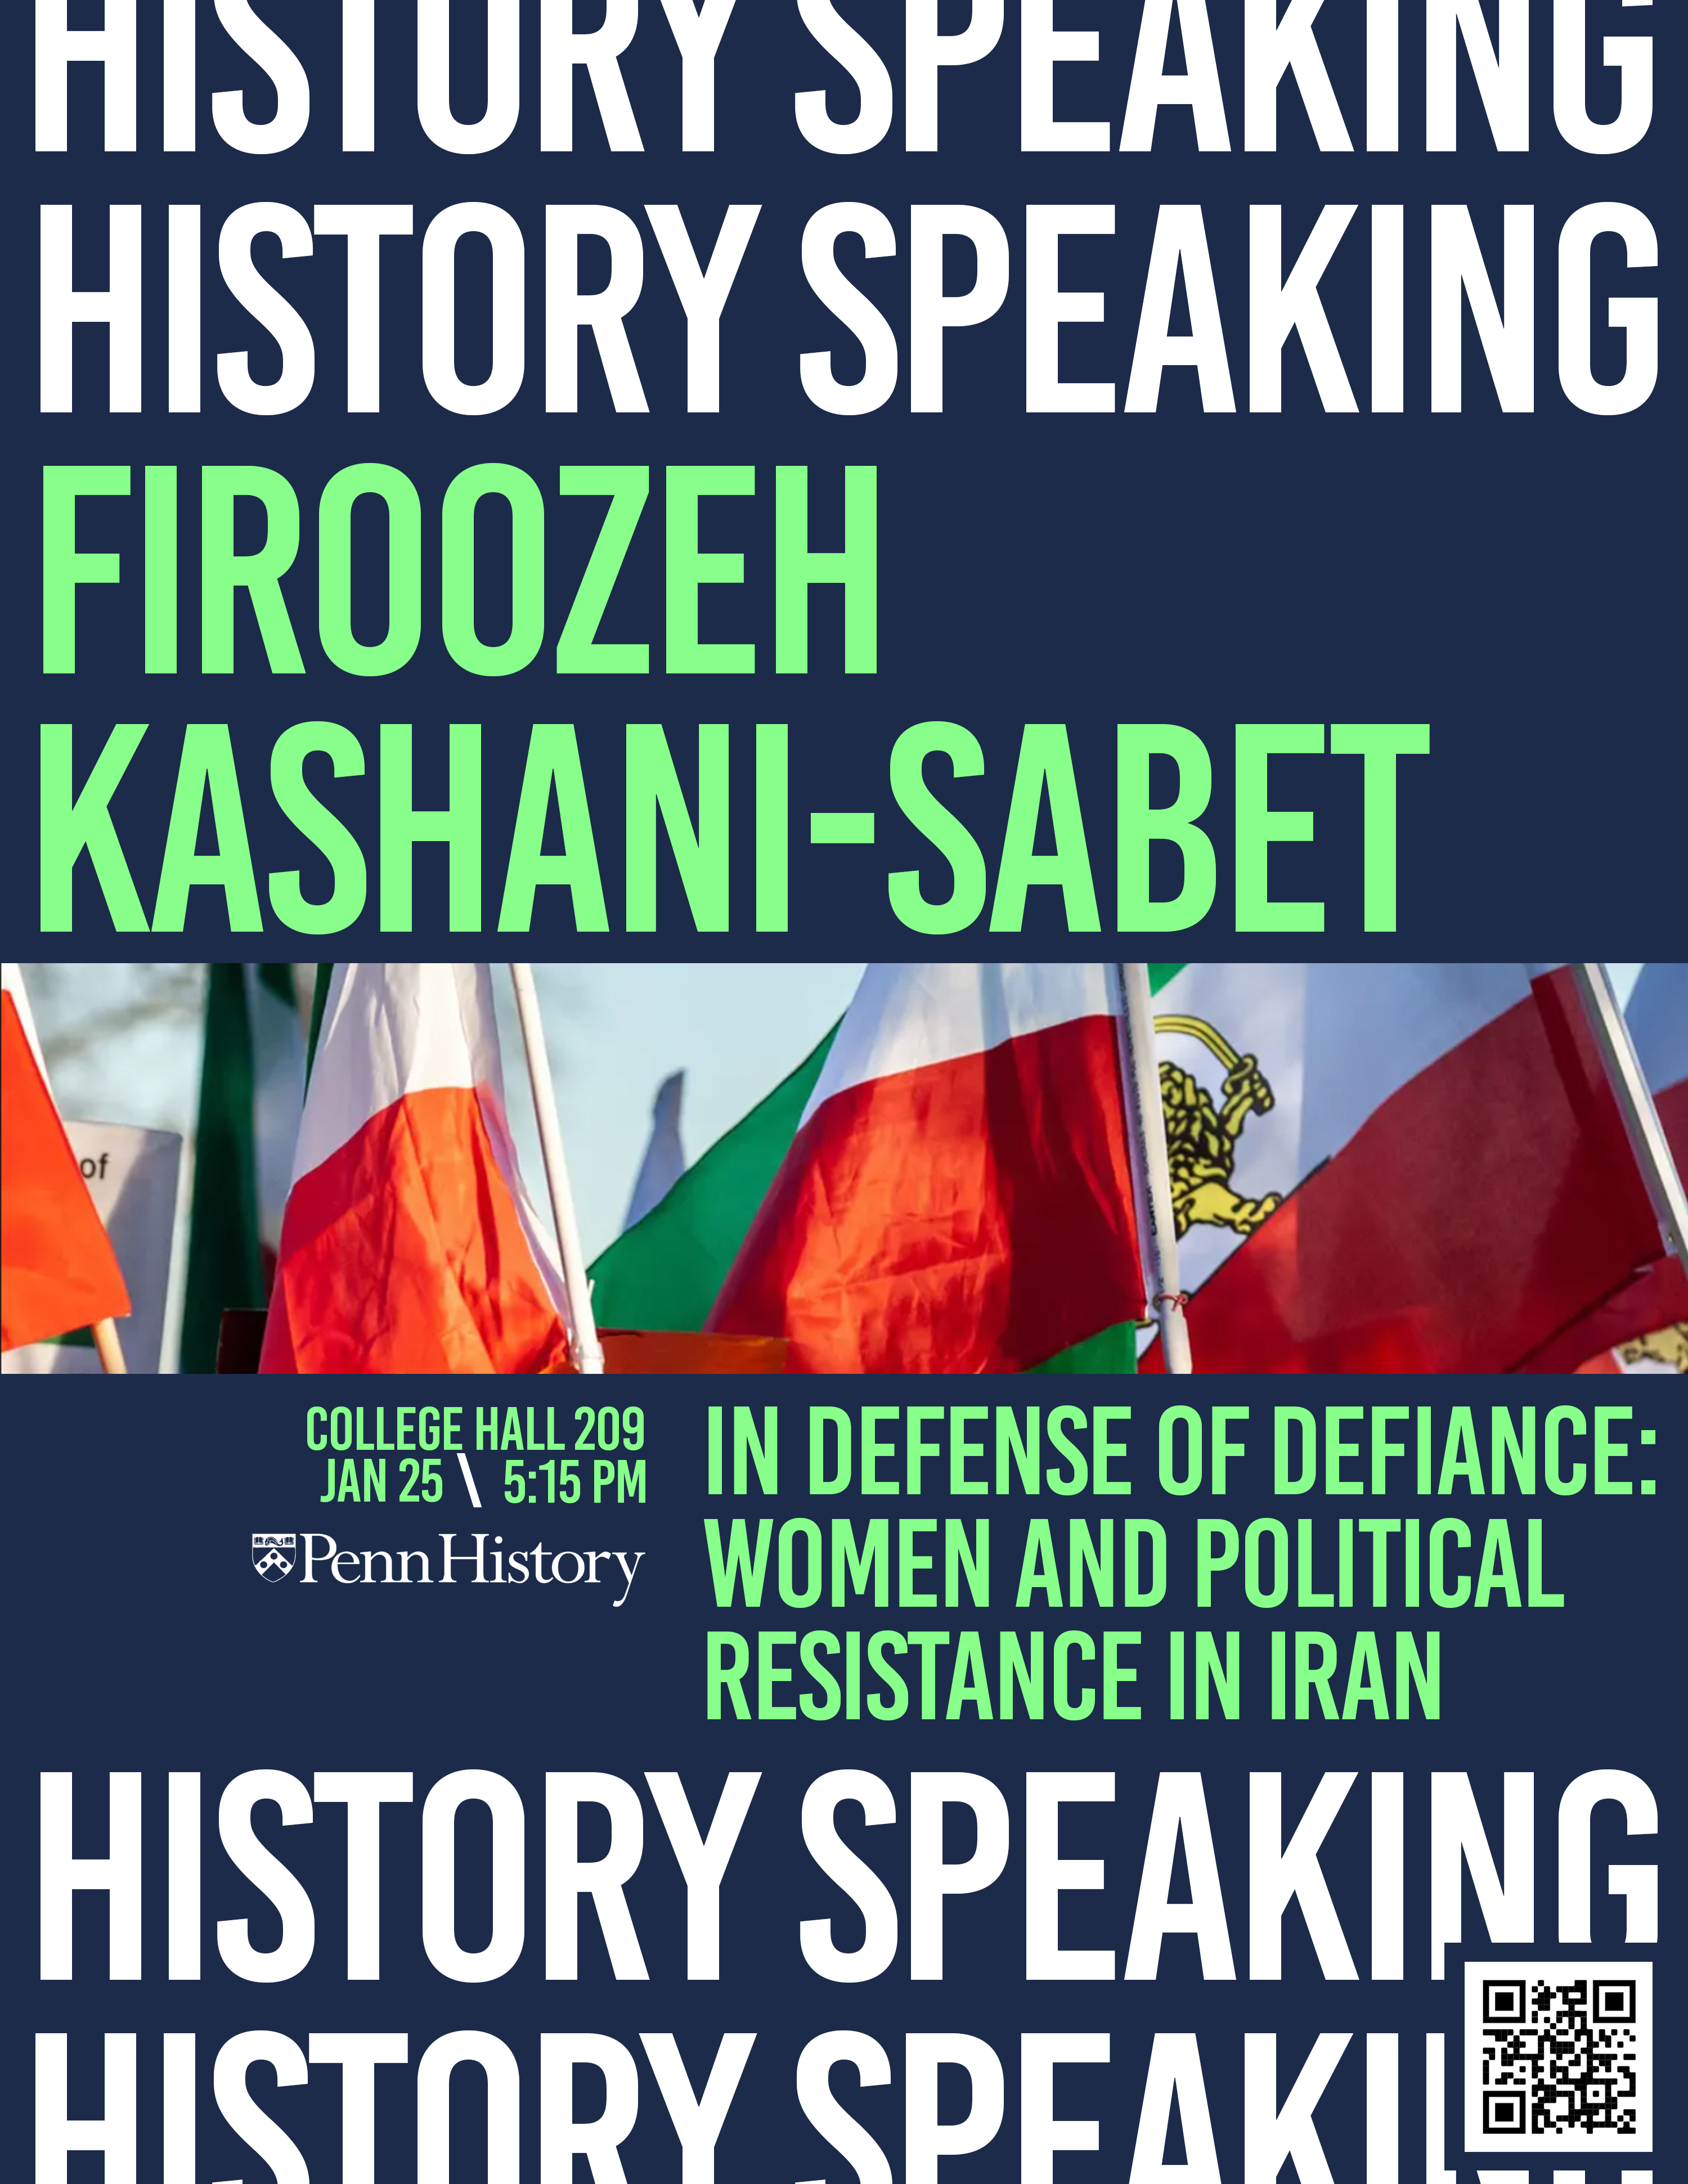 Flyer for Firoozeh Kashani-Sabet History Speaking event with a photo of multiple flags of Iran.